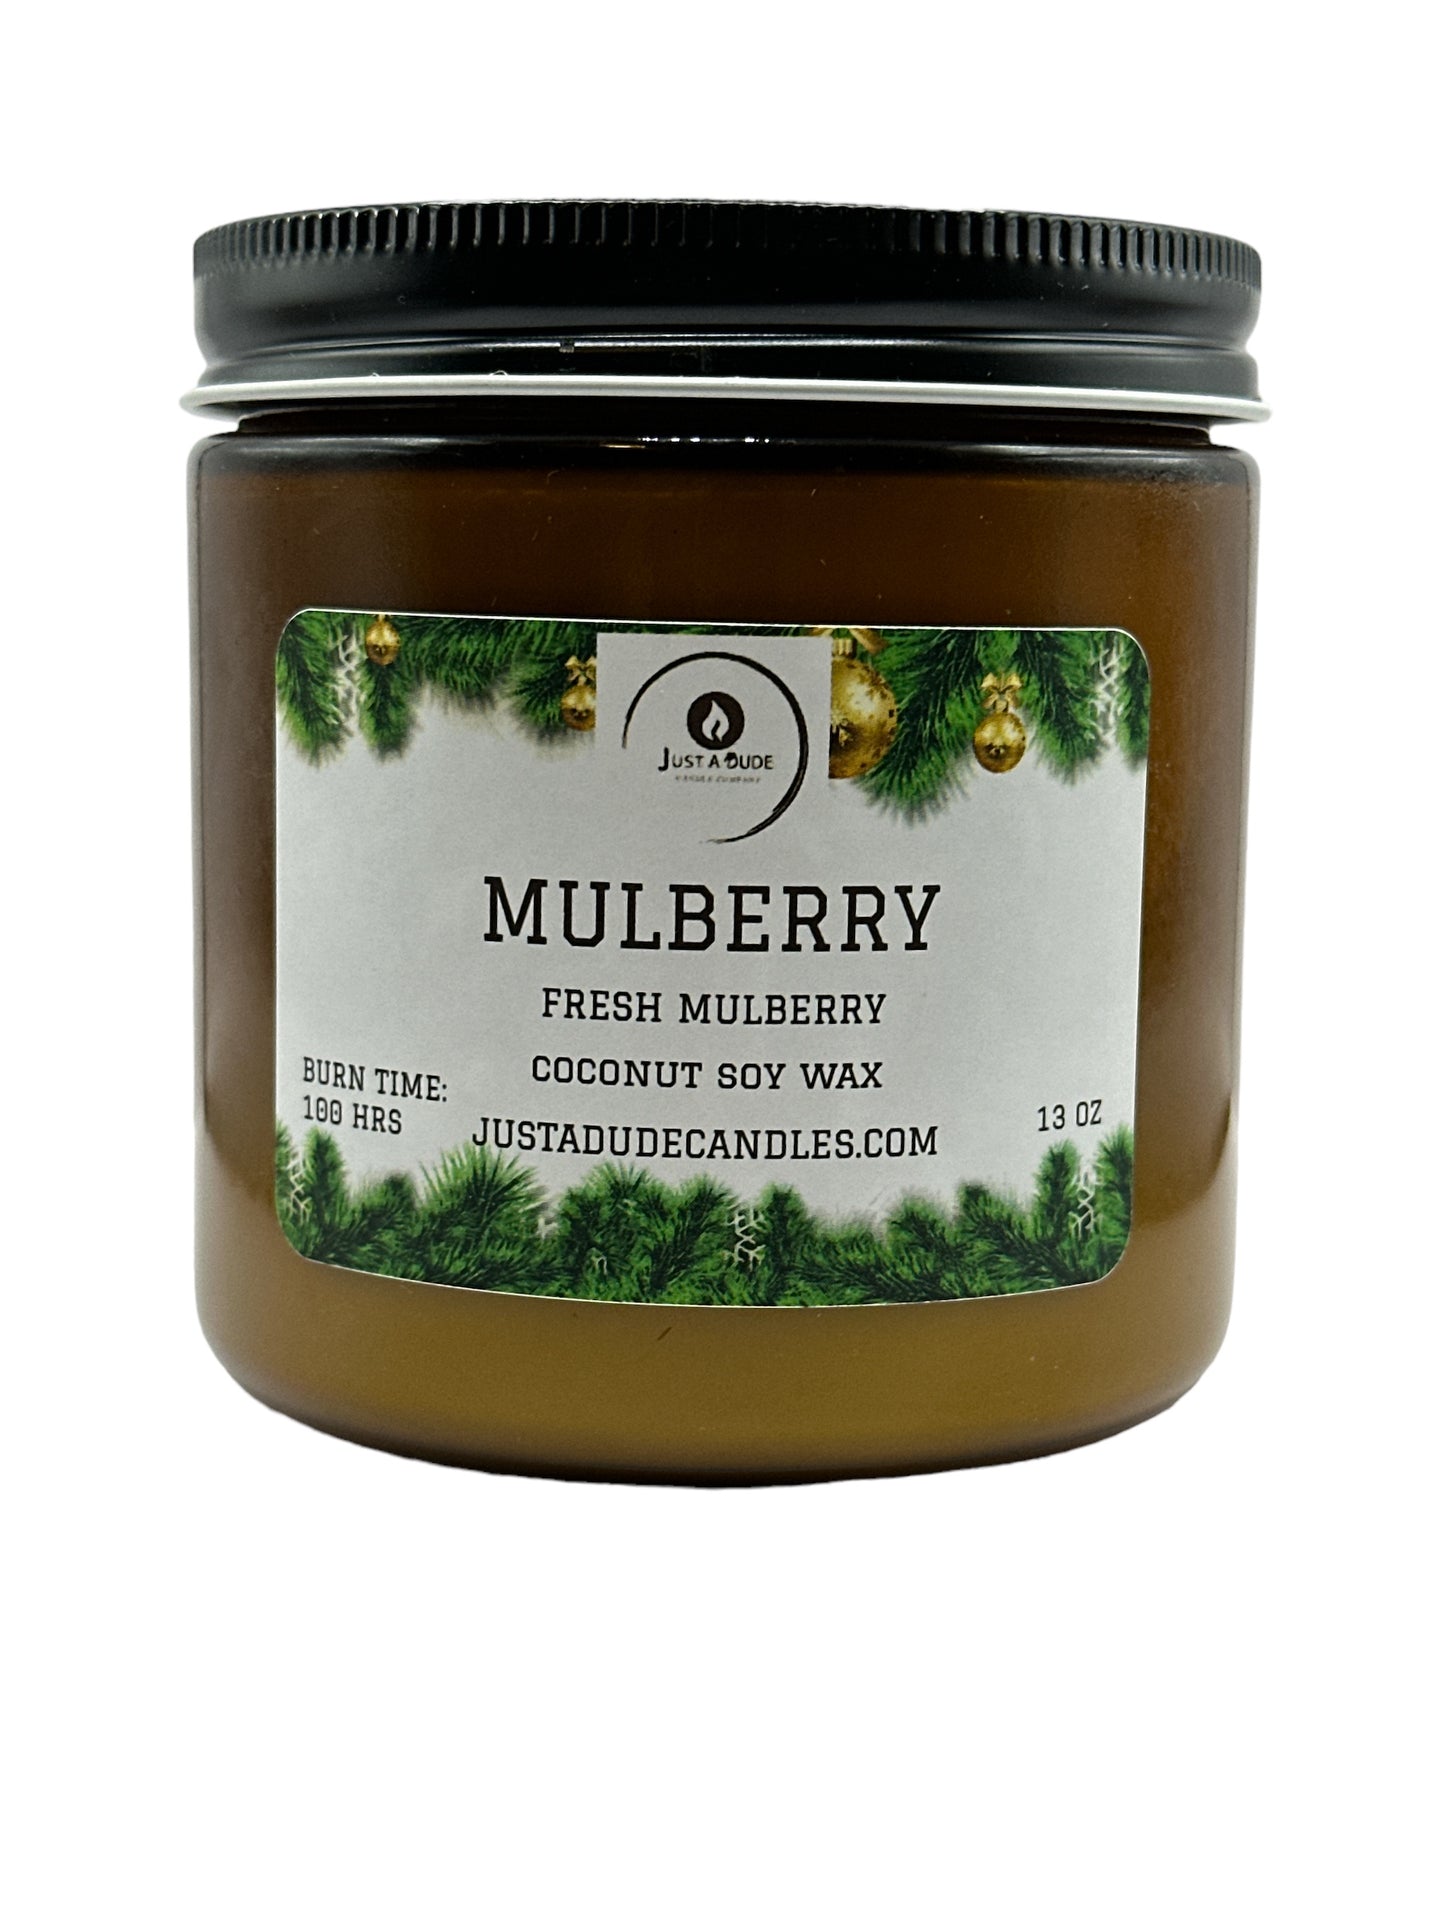 MULBERRY (FRESH MULBERRY) AMBER JAR COLLECTION